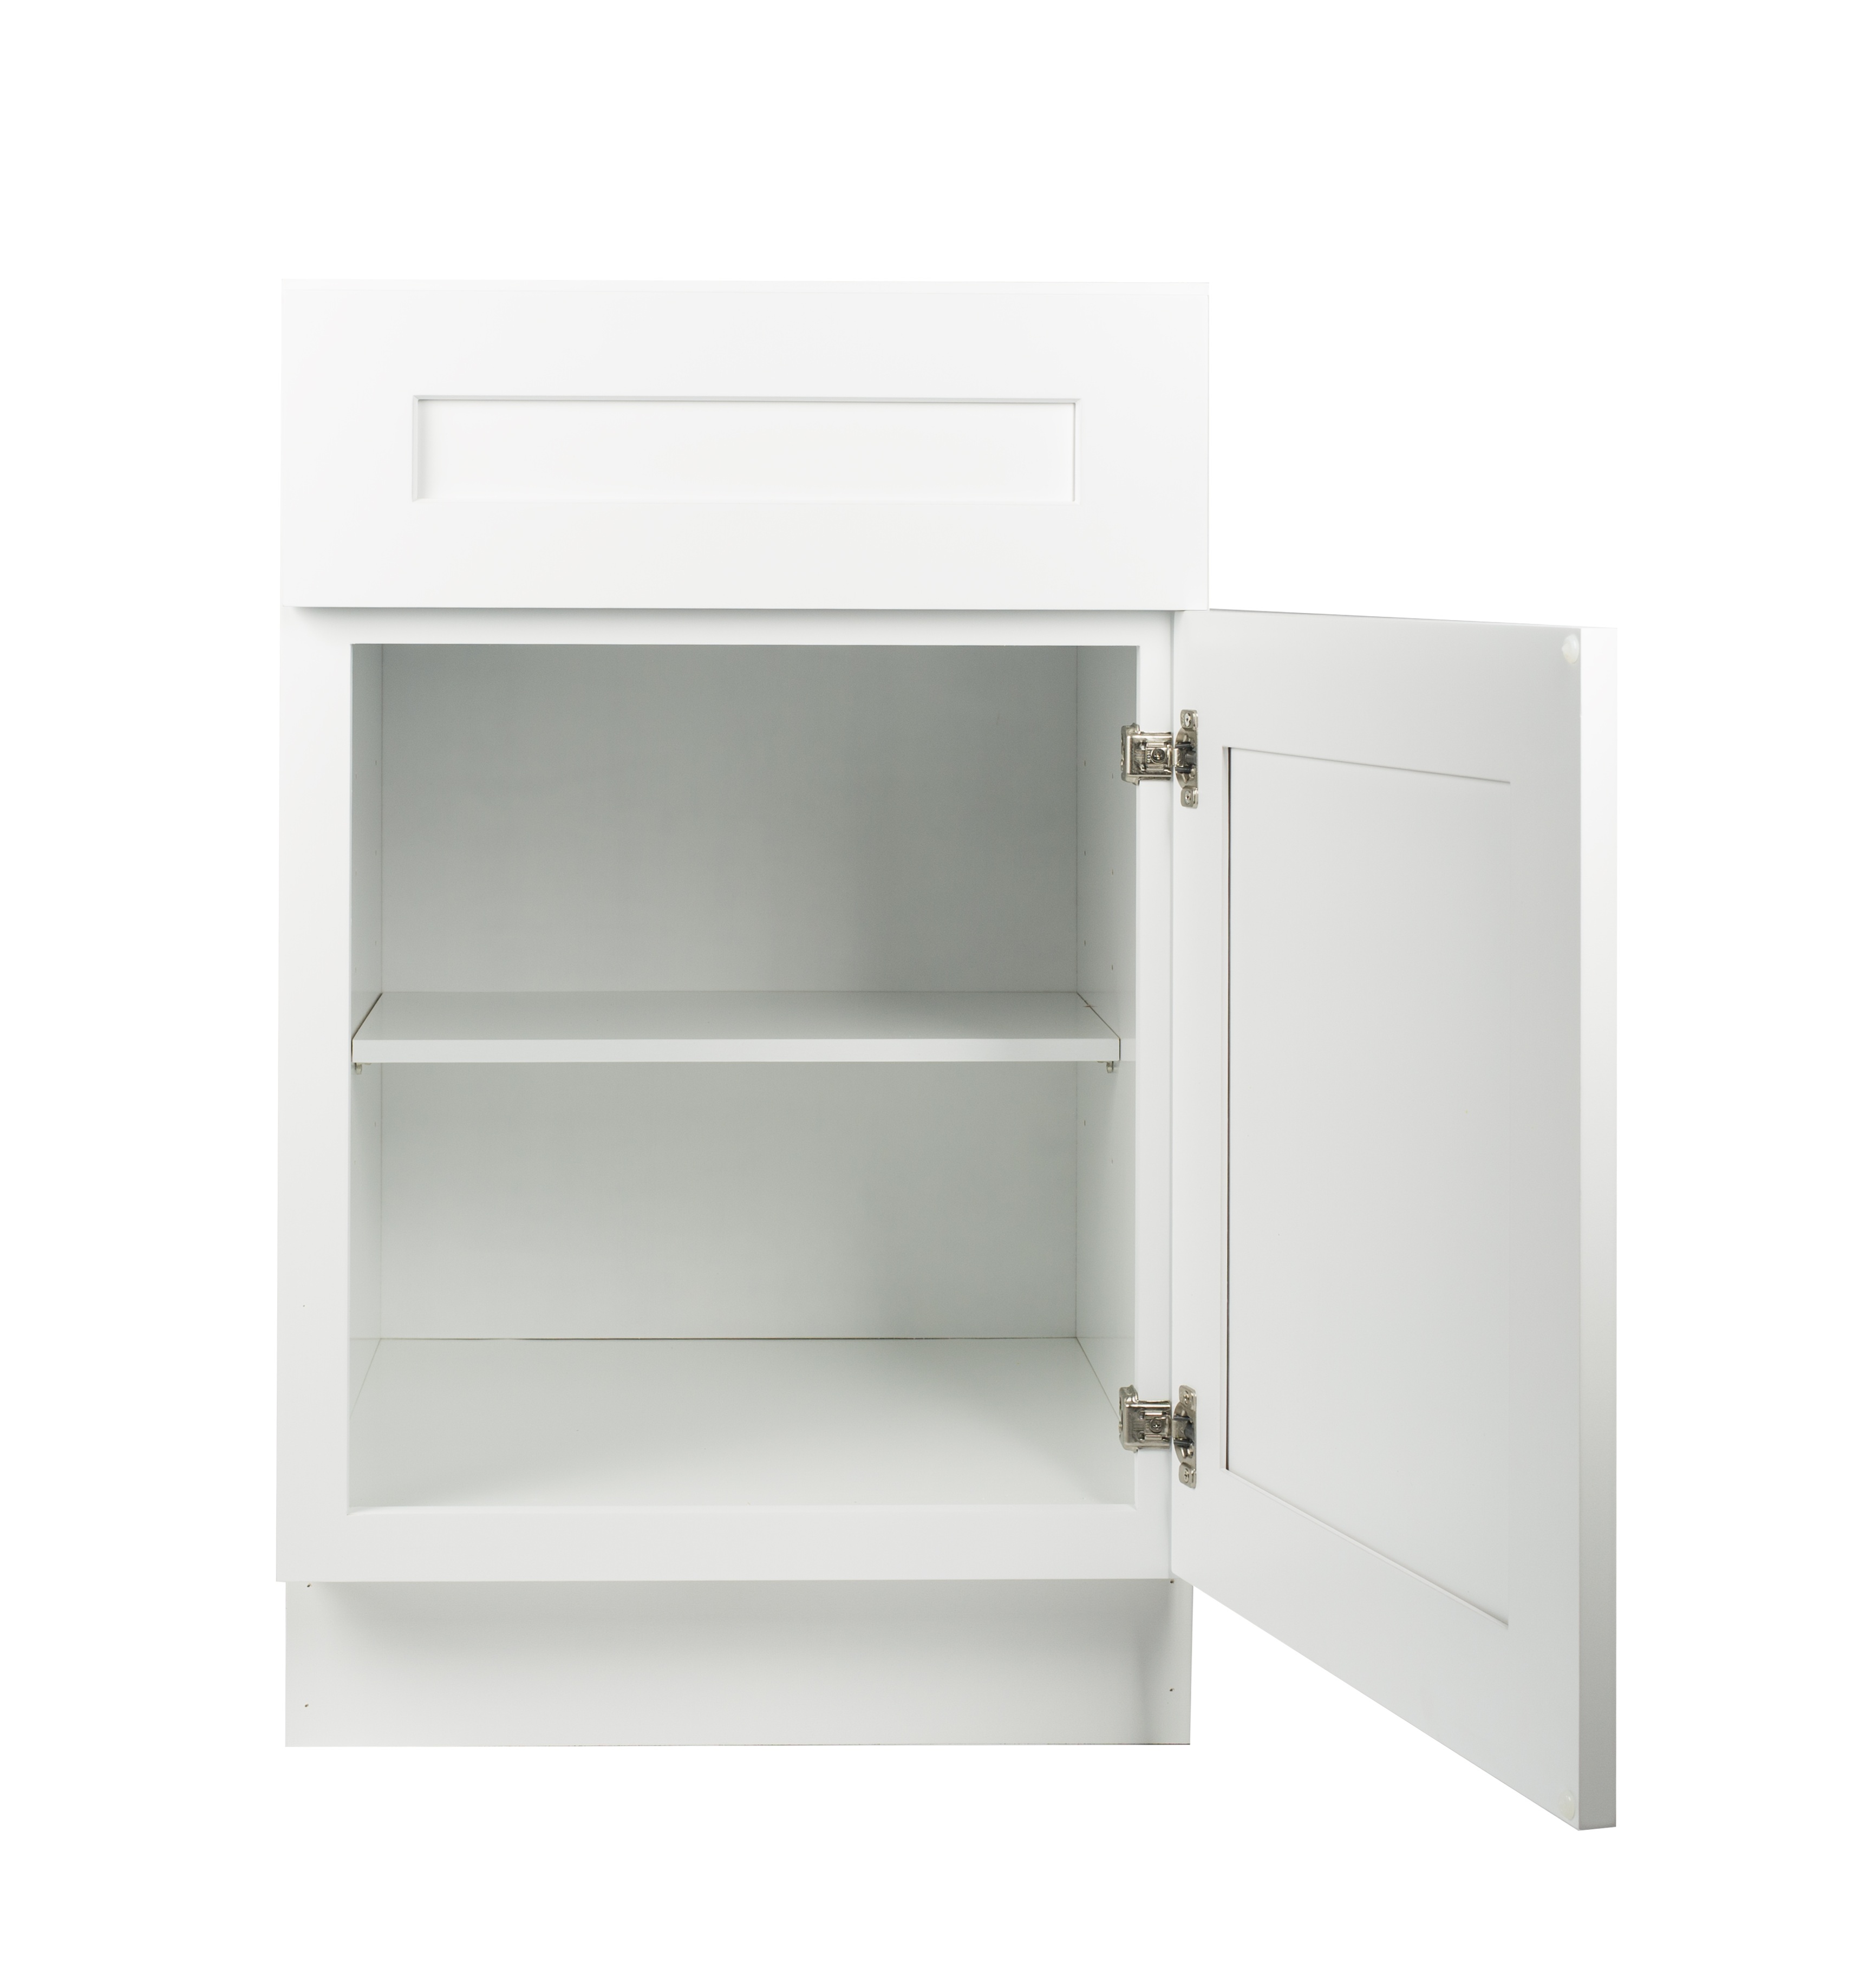 Ready to Assemble 9Wx34.5Hx24D in. Shaker Base Cabinet with 1 Door and 1 Drawer in White